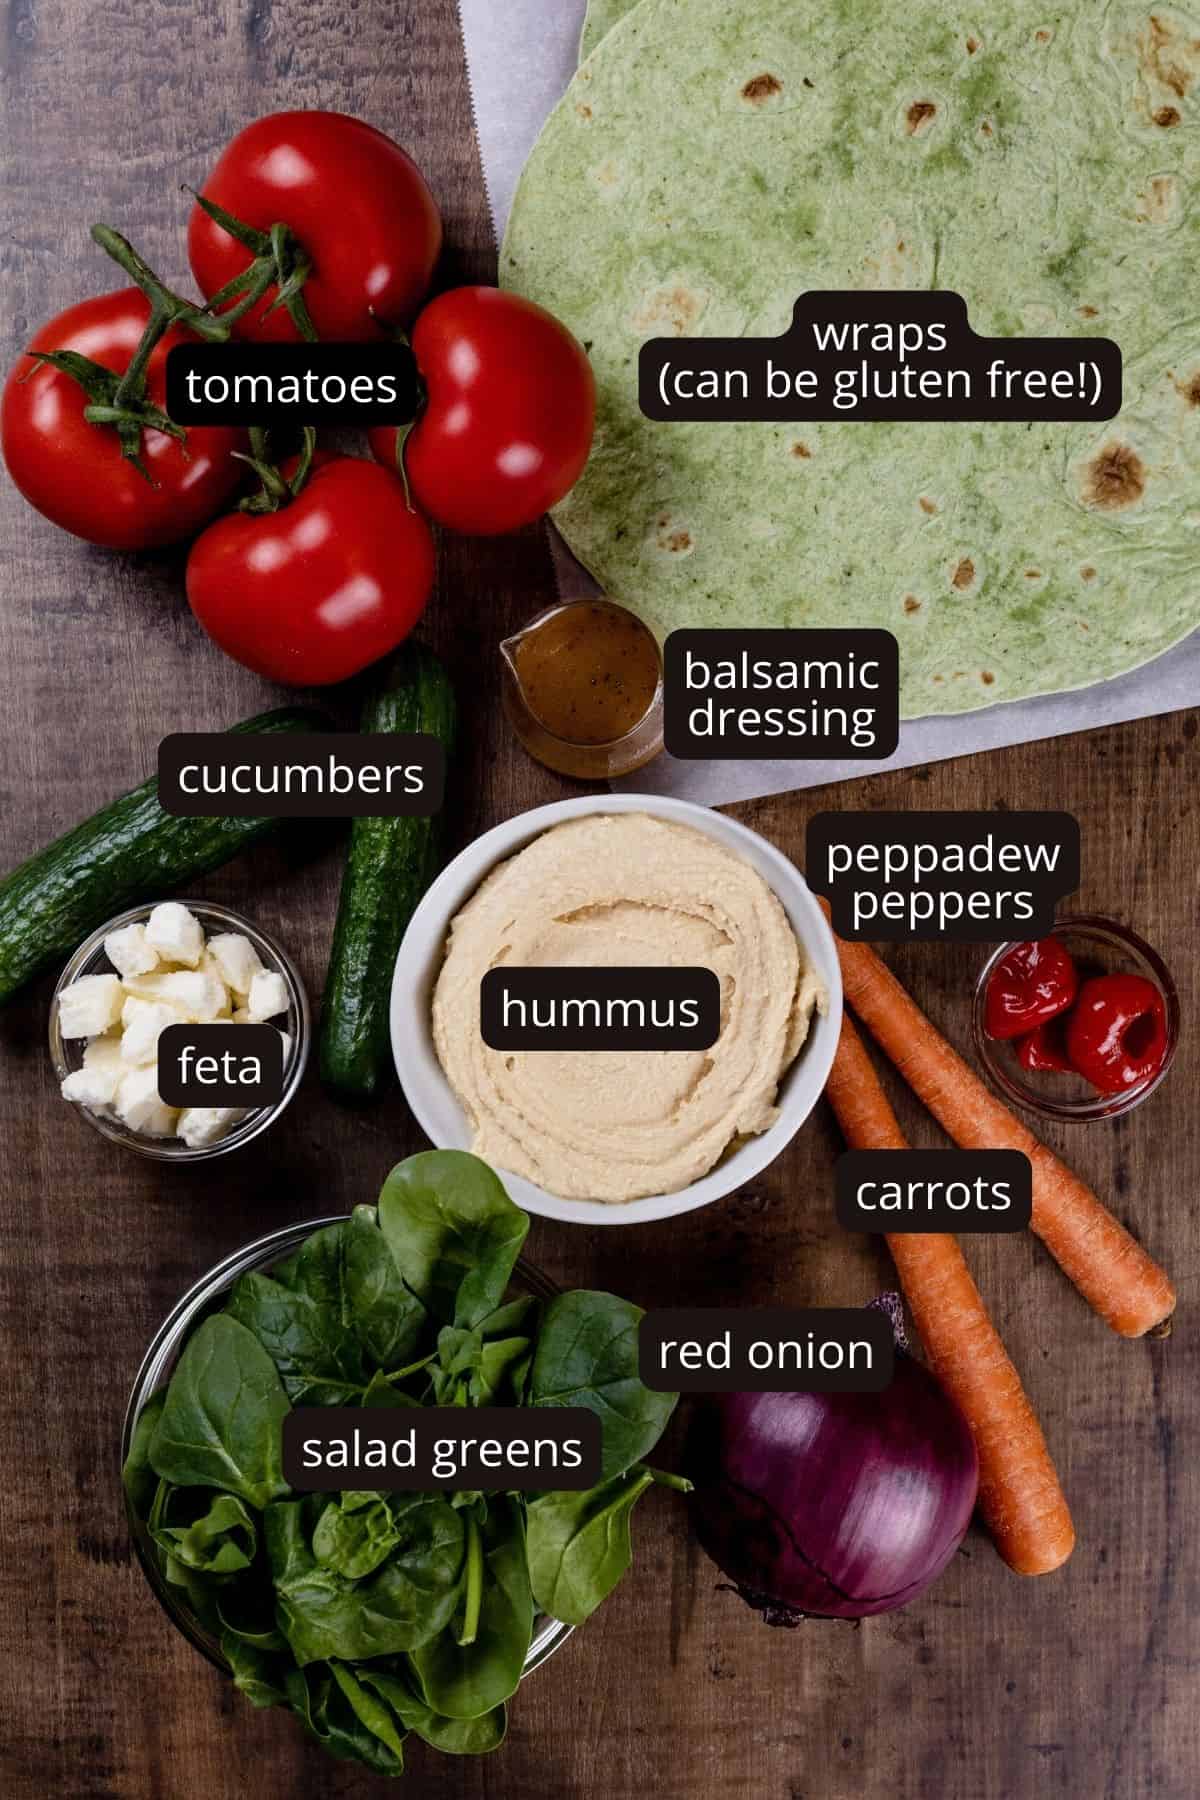 Ingredients for the veggie wrap in various glass bowls on a wood tabletop. Black and white labels have been added to name each ingredient.